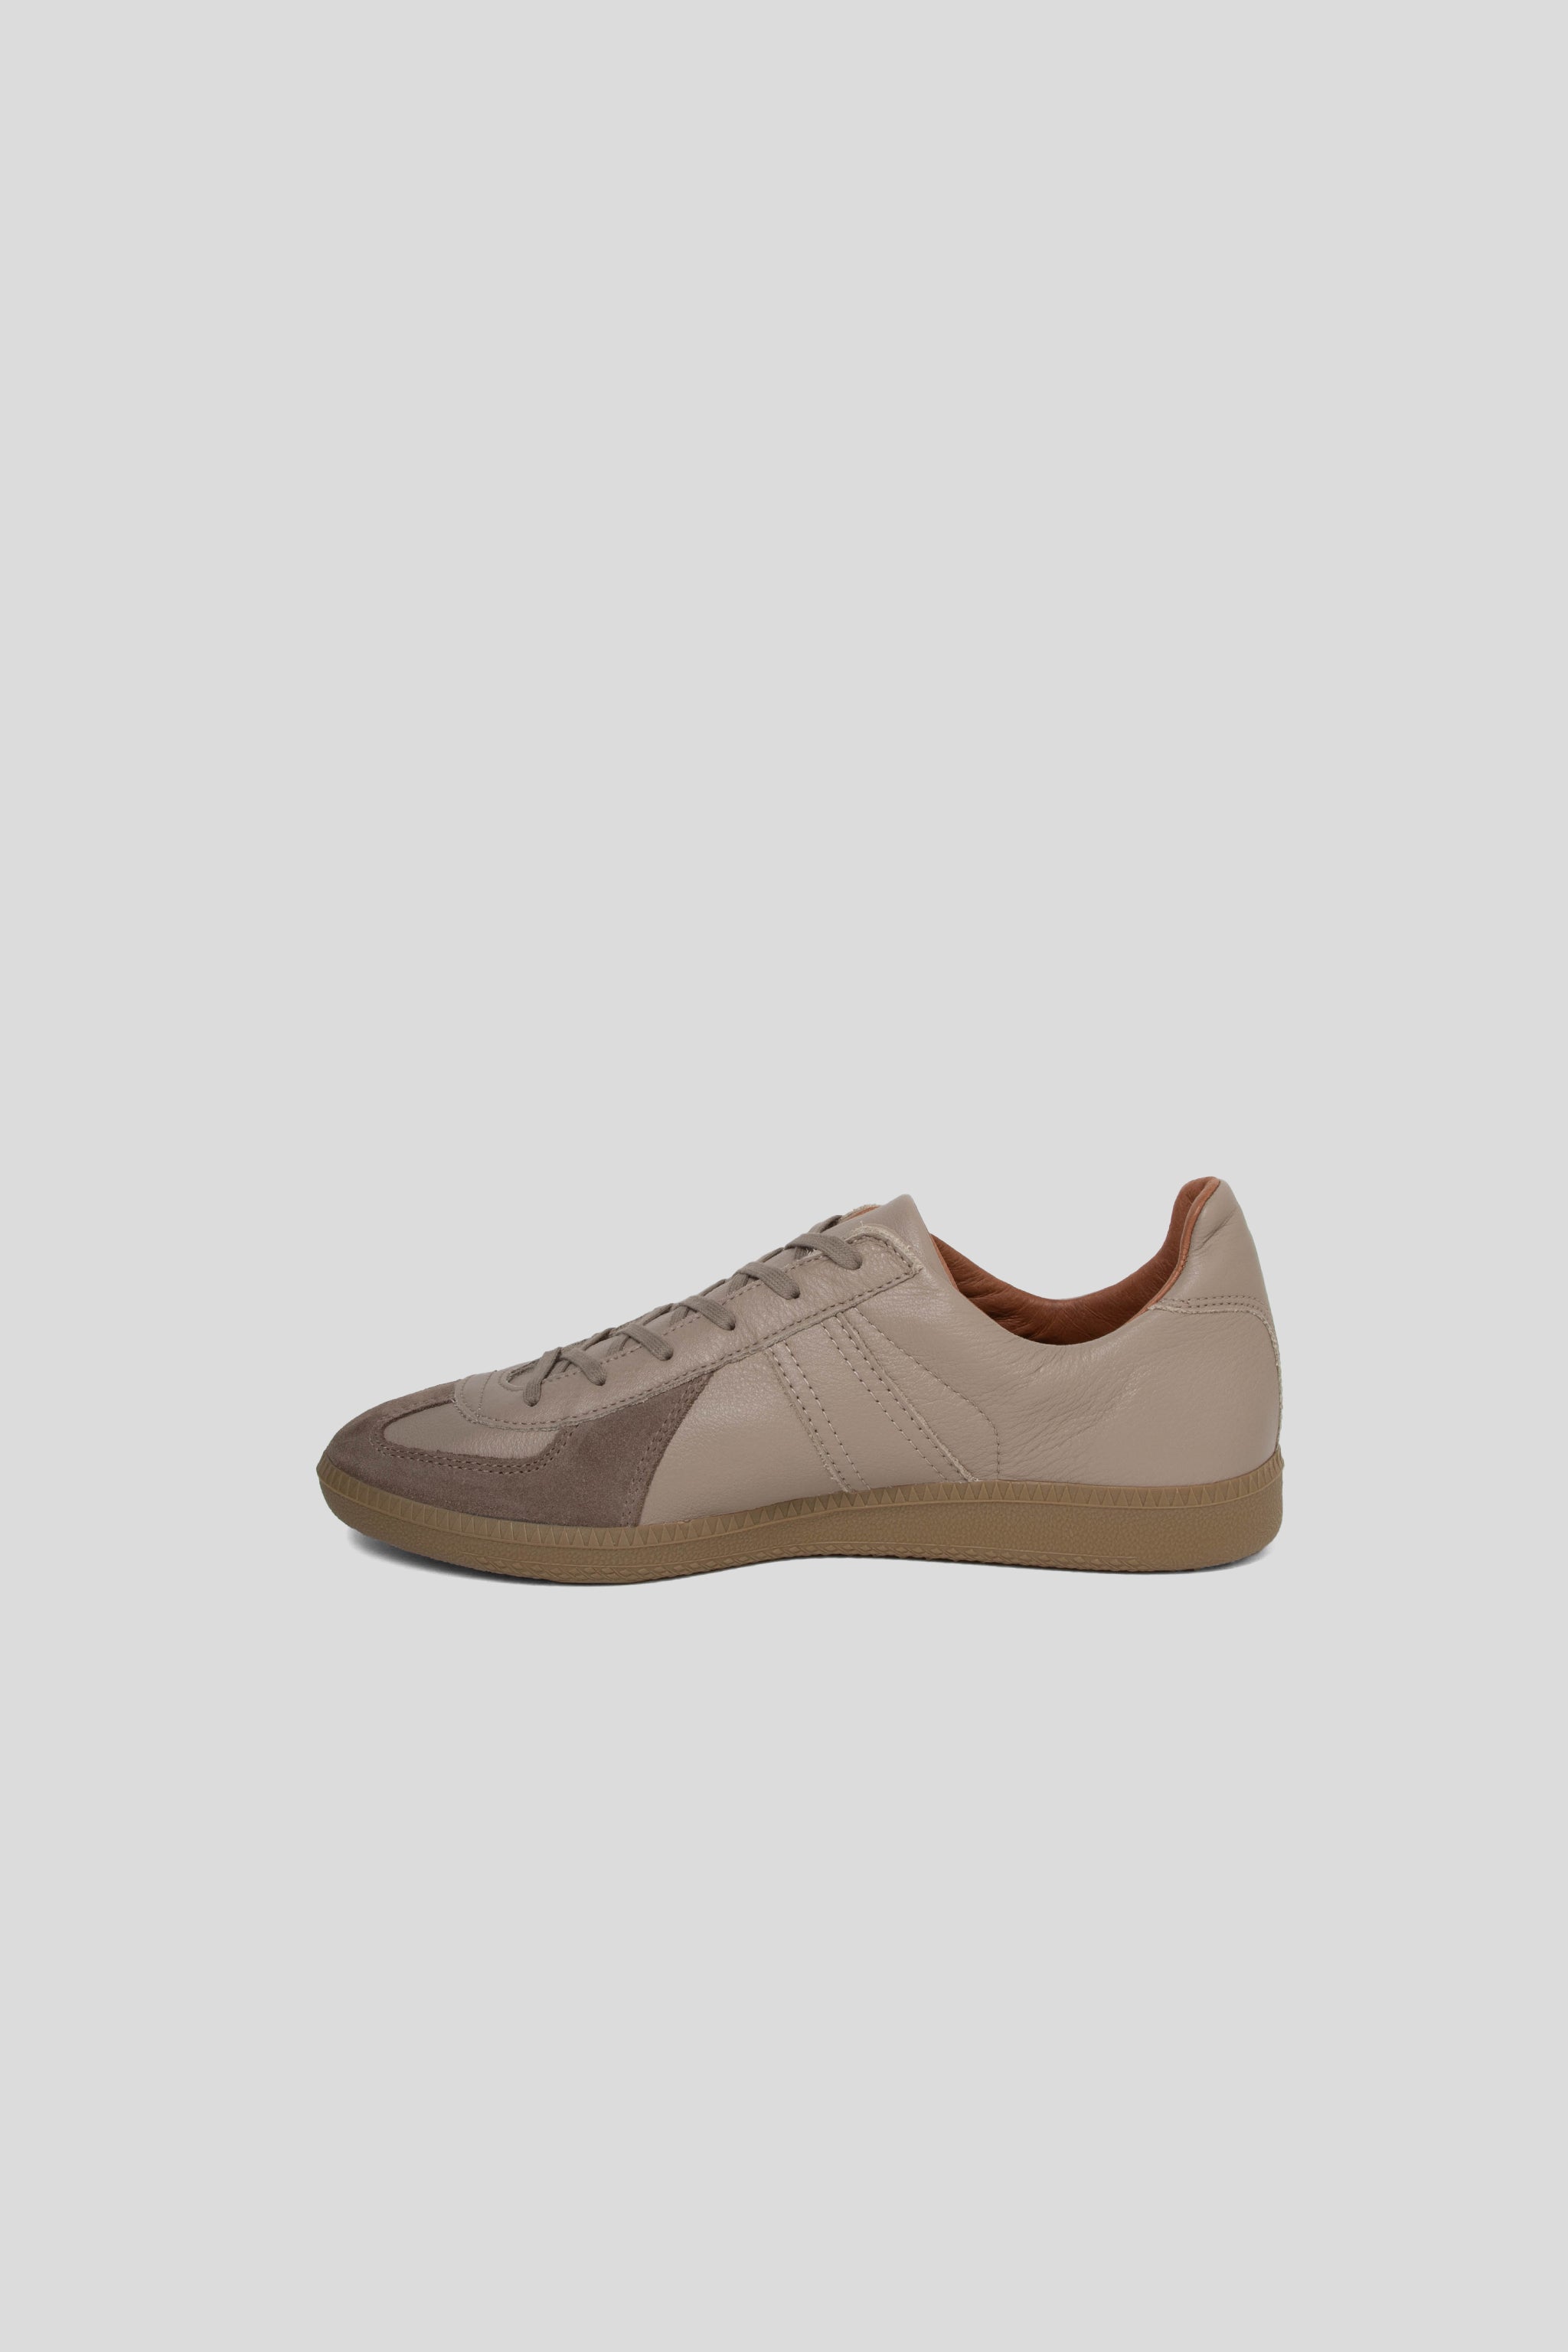 Reproduction of Found German Military Trainer - Beige Khaki 